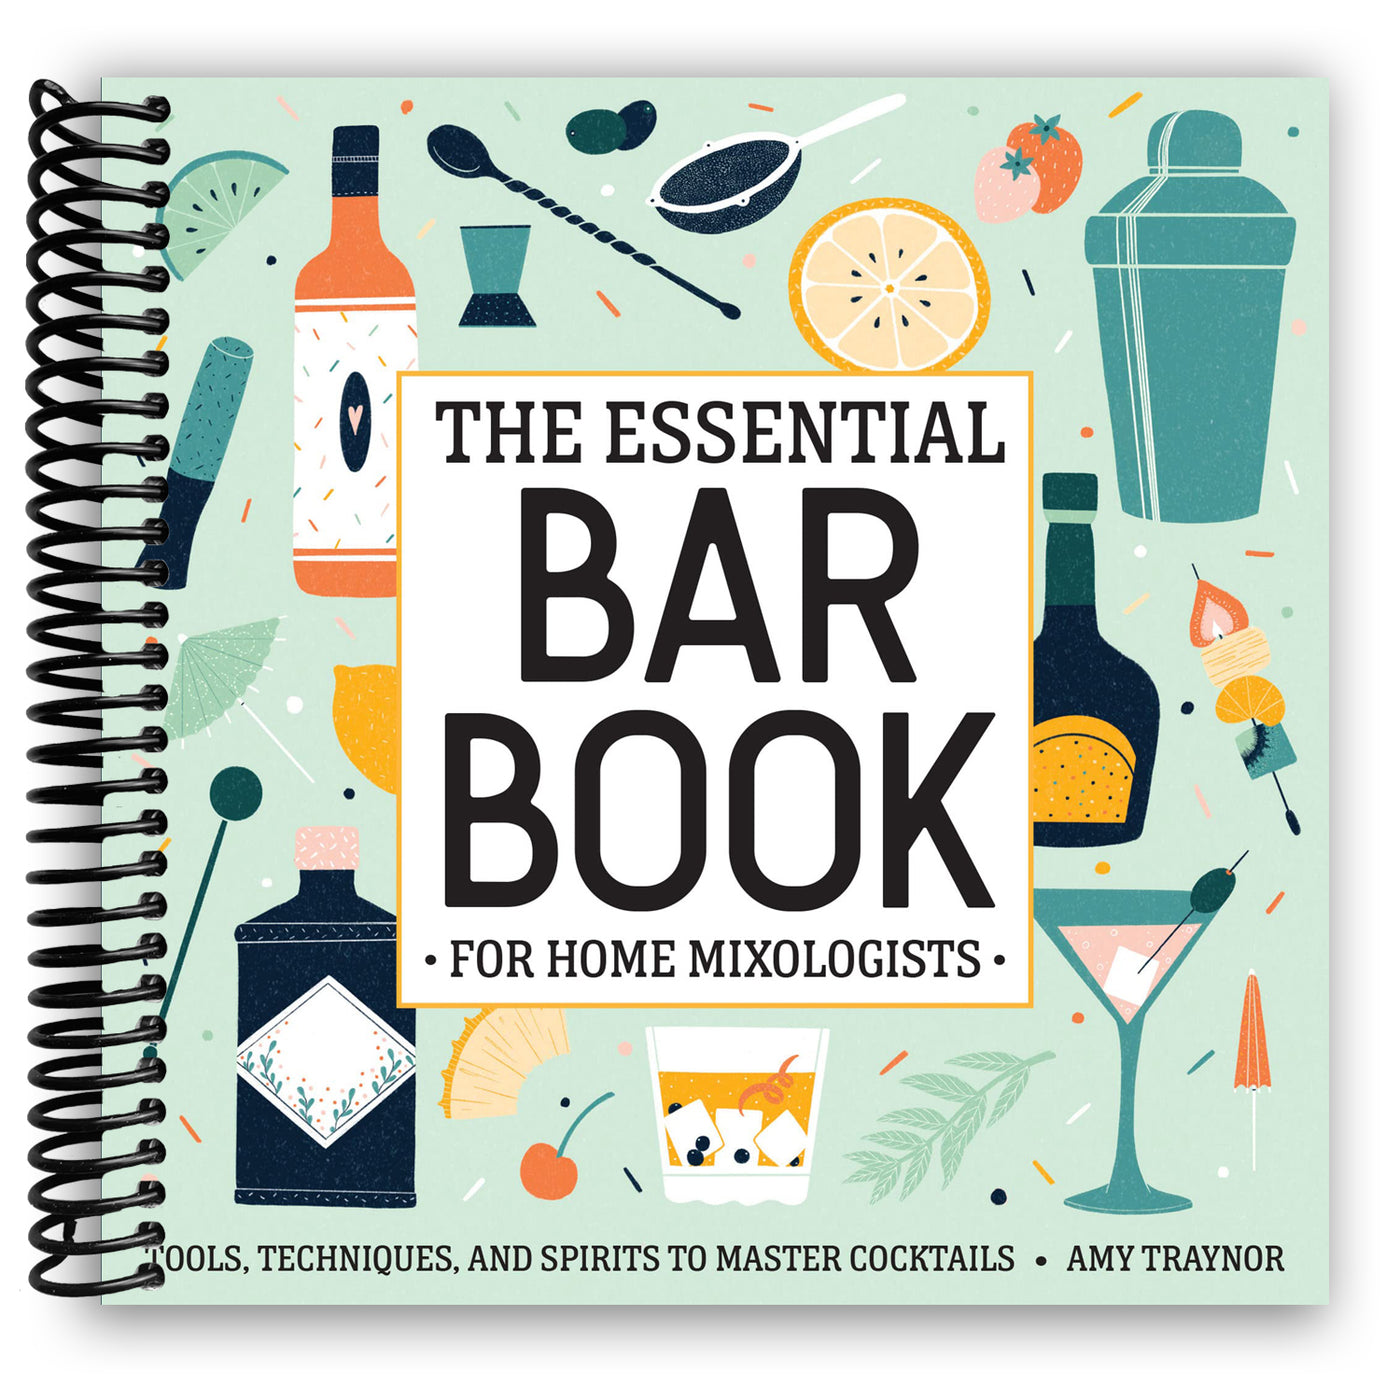 The Essential Bar Book for Home Mixologists: Tools, Techniques, and Spirits to Master Cocktails (Spiral Bound)